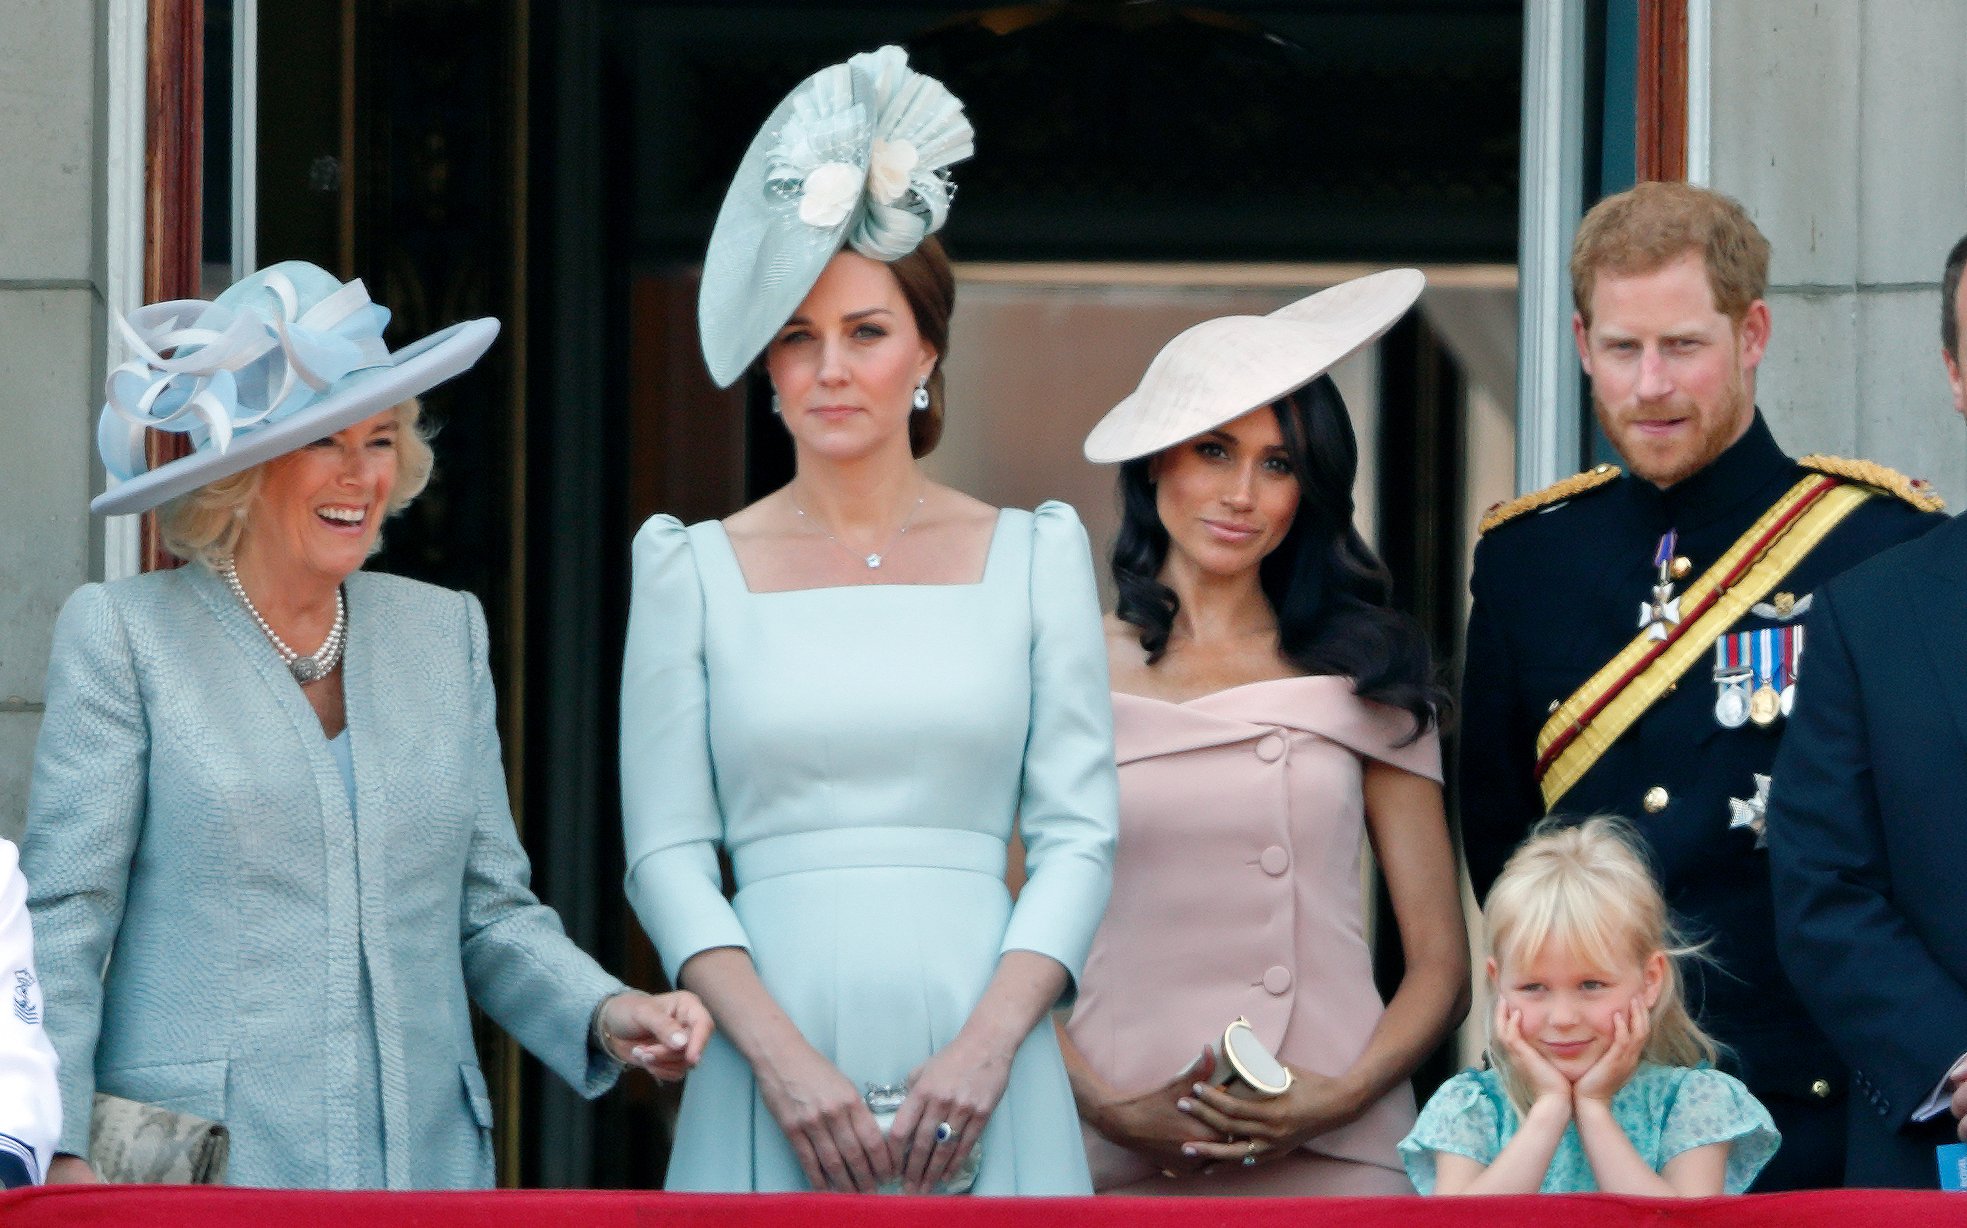 Camilla, Duchess of Cornwall, Catherine, Duchess of Cambridge, Meghan, Duchess of Sussex, Prince Harry, Duke of Sussex and Isla Phillips on the balcony of Buckingham Palace during Trooping The Colour 2018 on June 9, 2018 in London, England. / Source: Getty Images